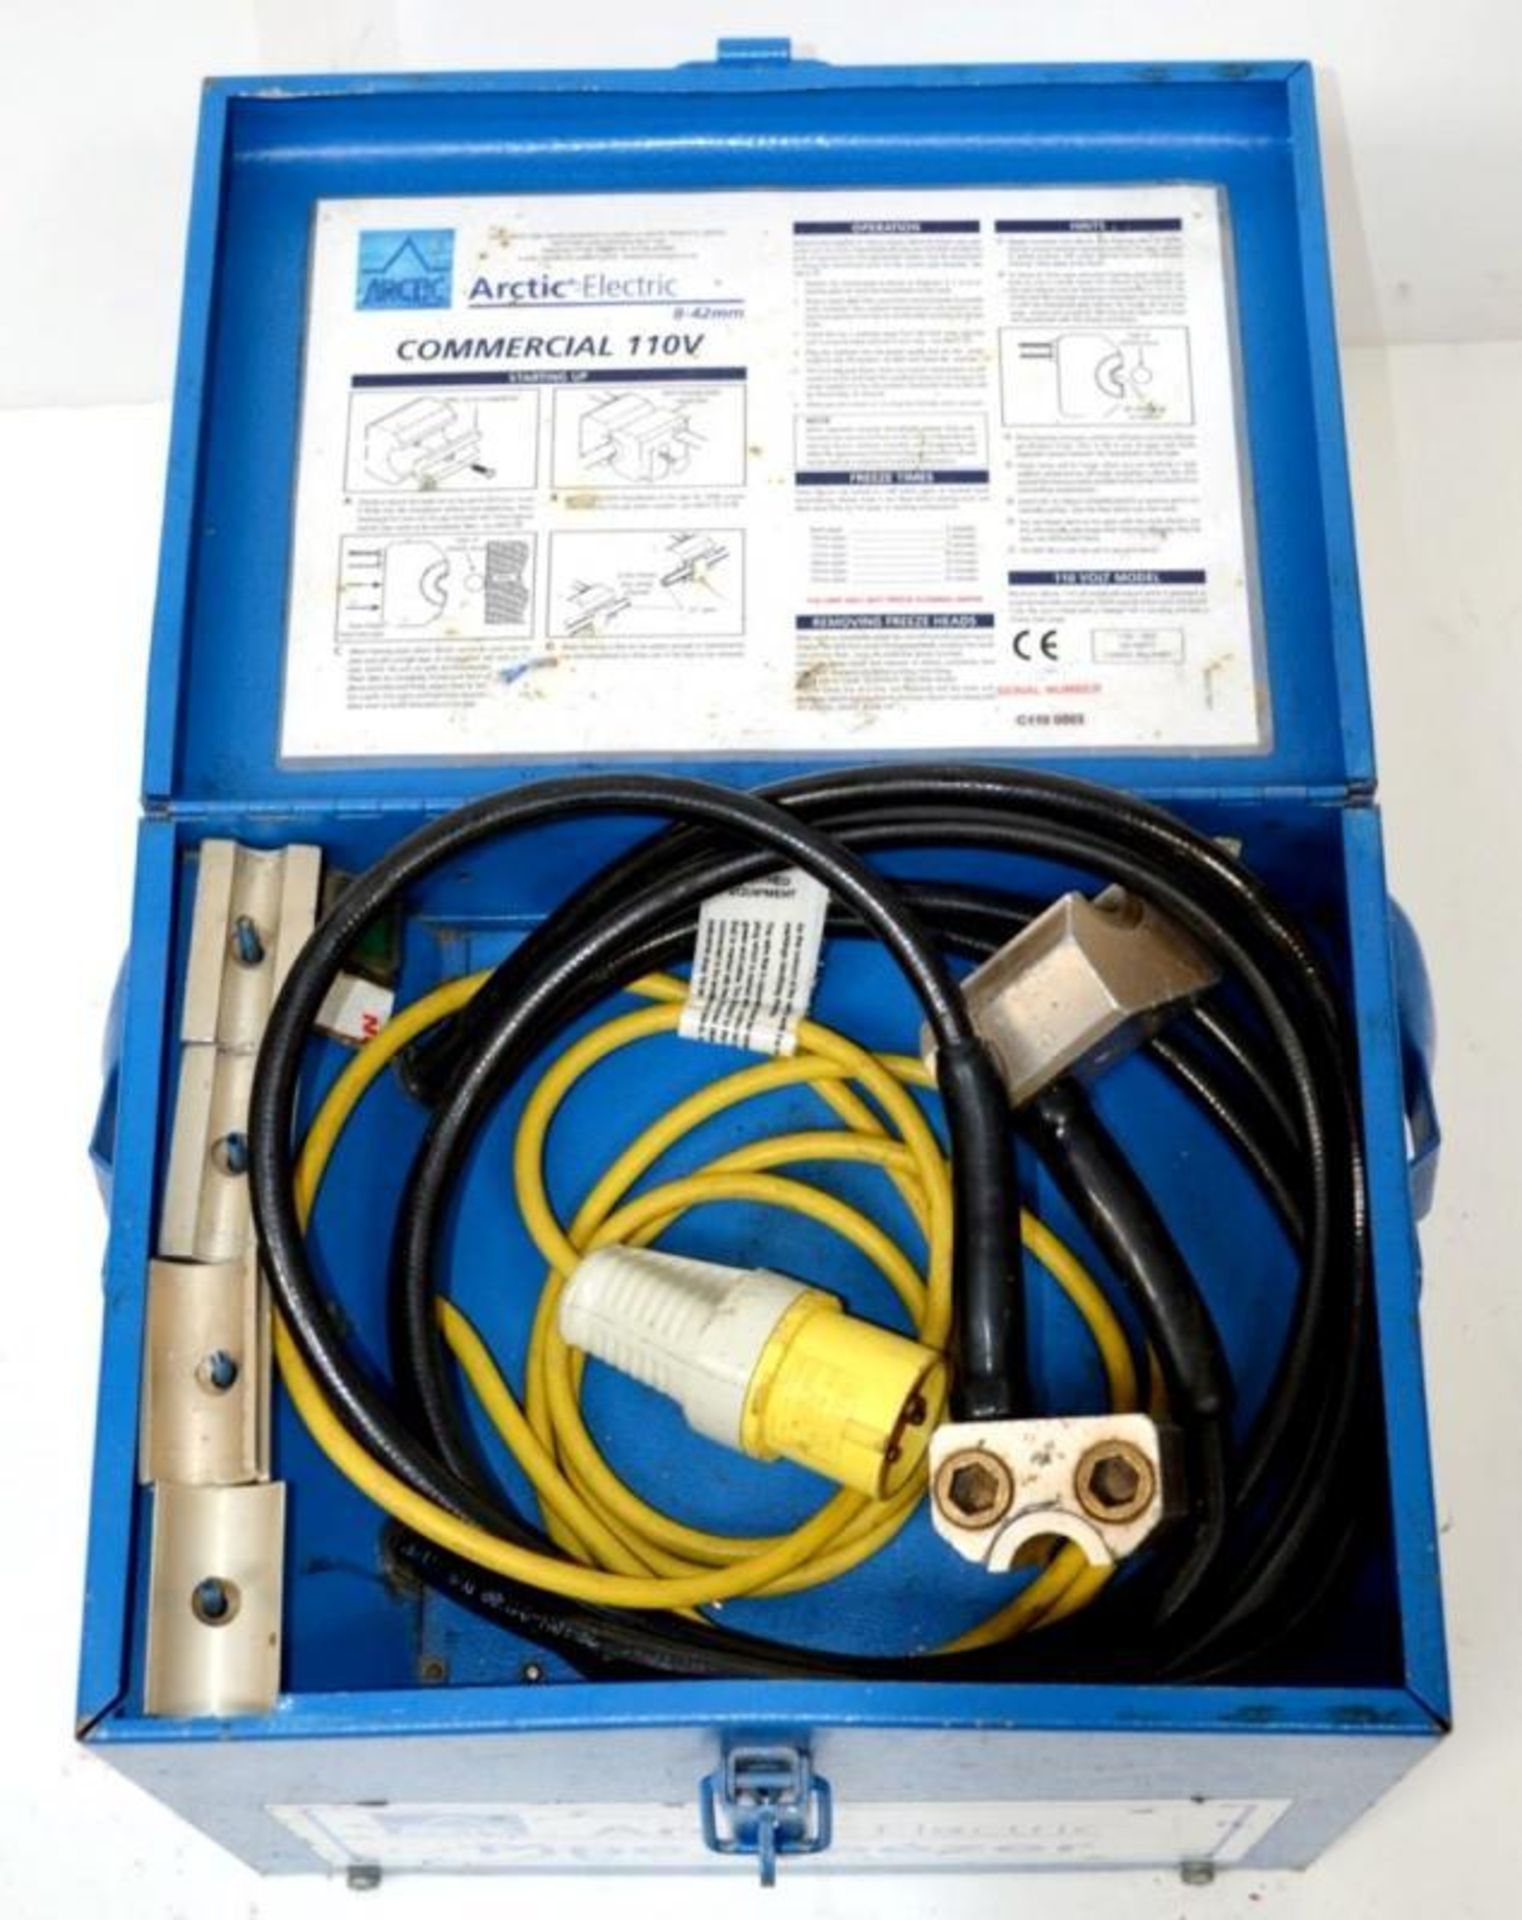 1 x Freeze Master Arctic Freeze Electric Pipe Freezer 110 volt - Used In Working Order - MWI014 - - Image 7 of 10